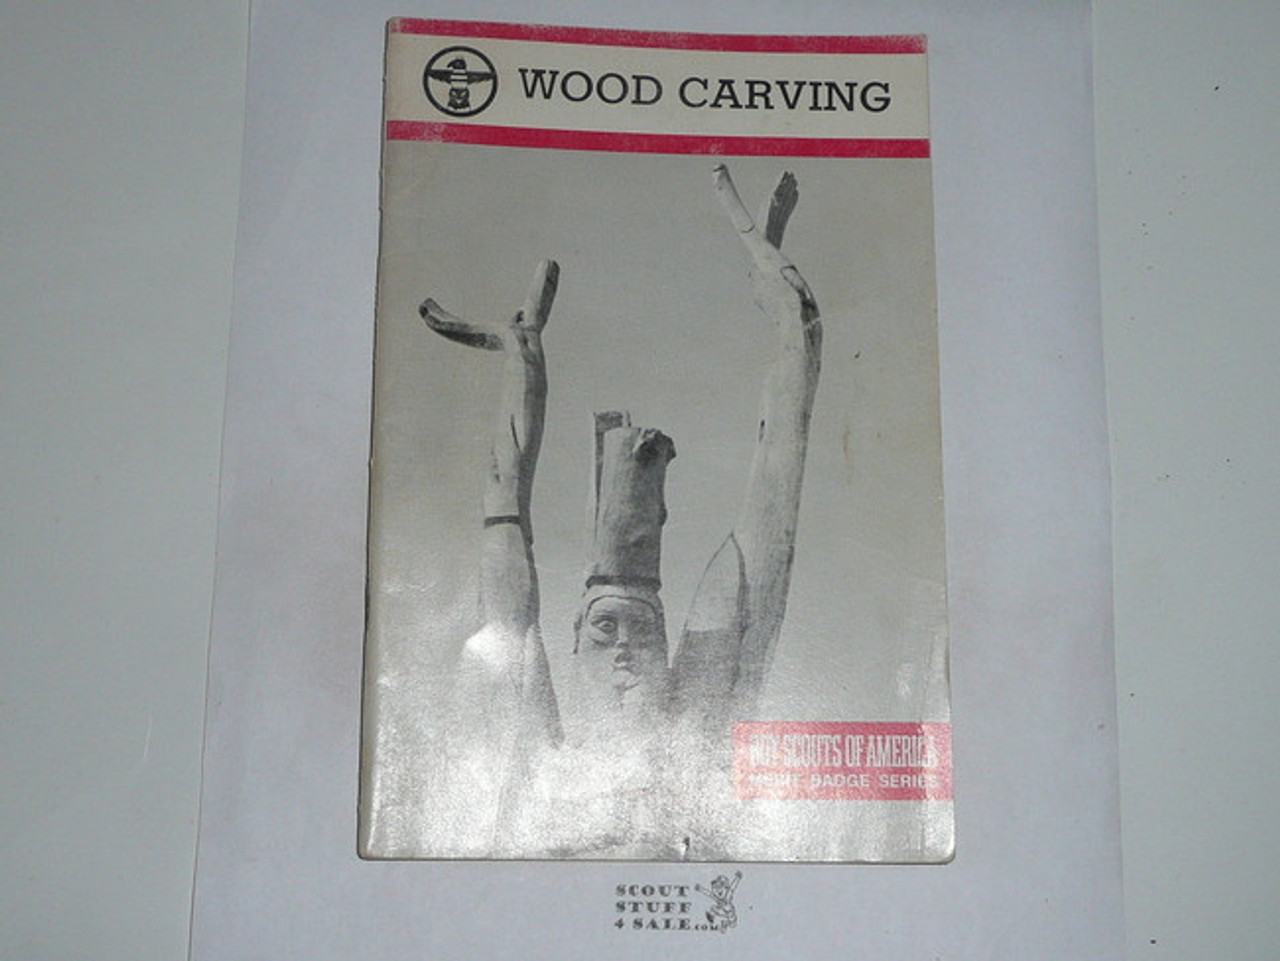 Woodcarving Merit Badge Pamphlet, Type 9, Red Band Cover, 3-83 Printing, used